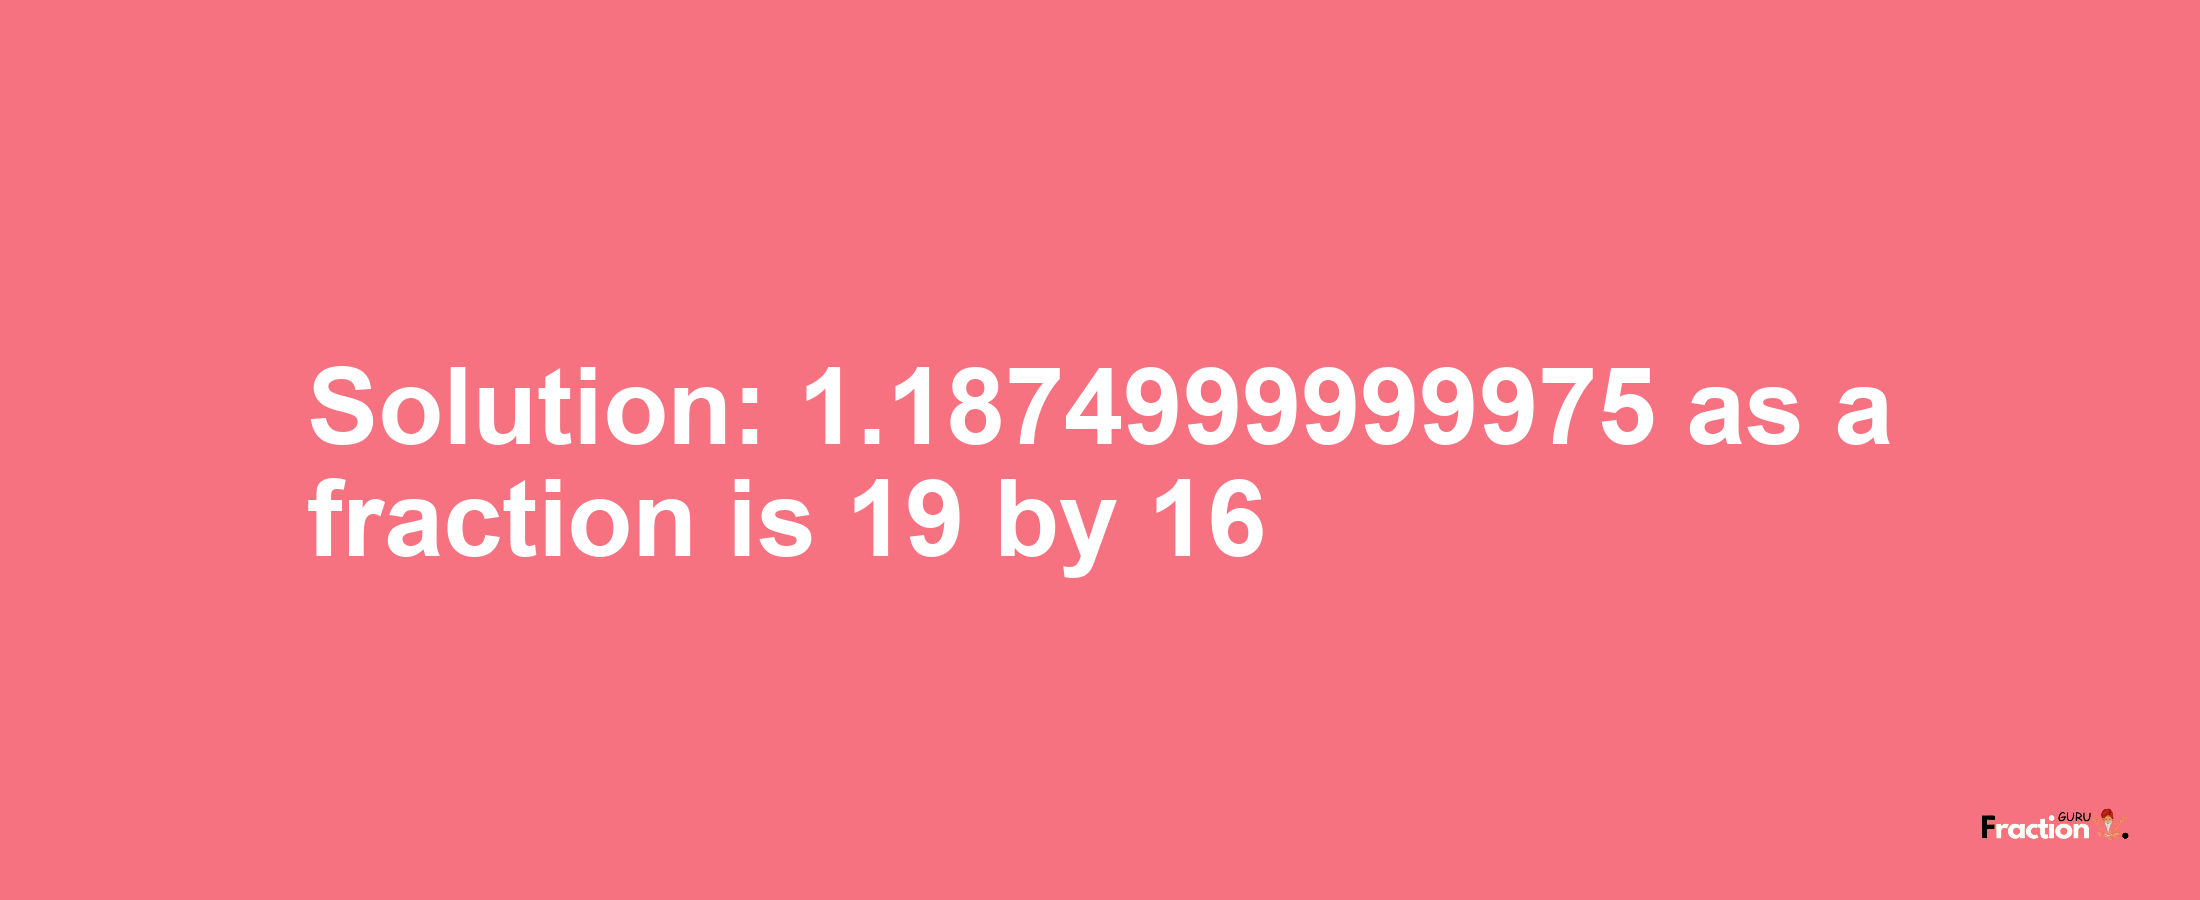 Solution:1.1874999999975 as a fraction is 19/16